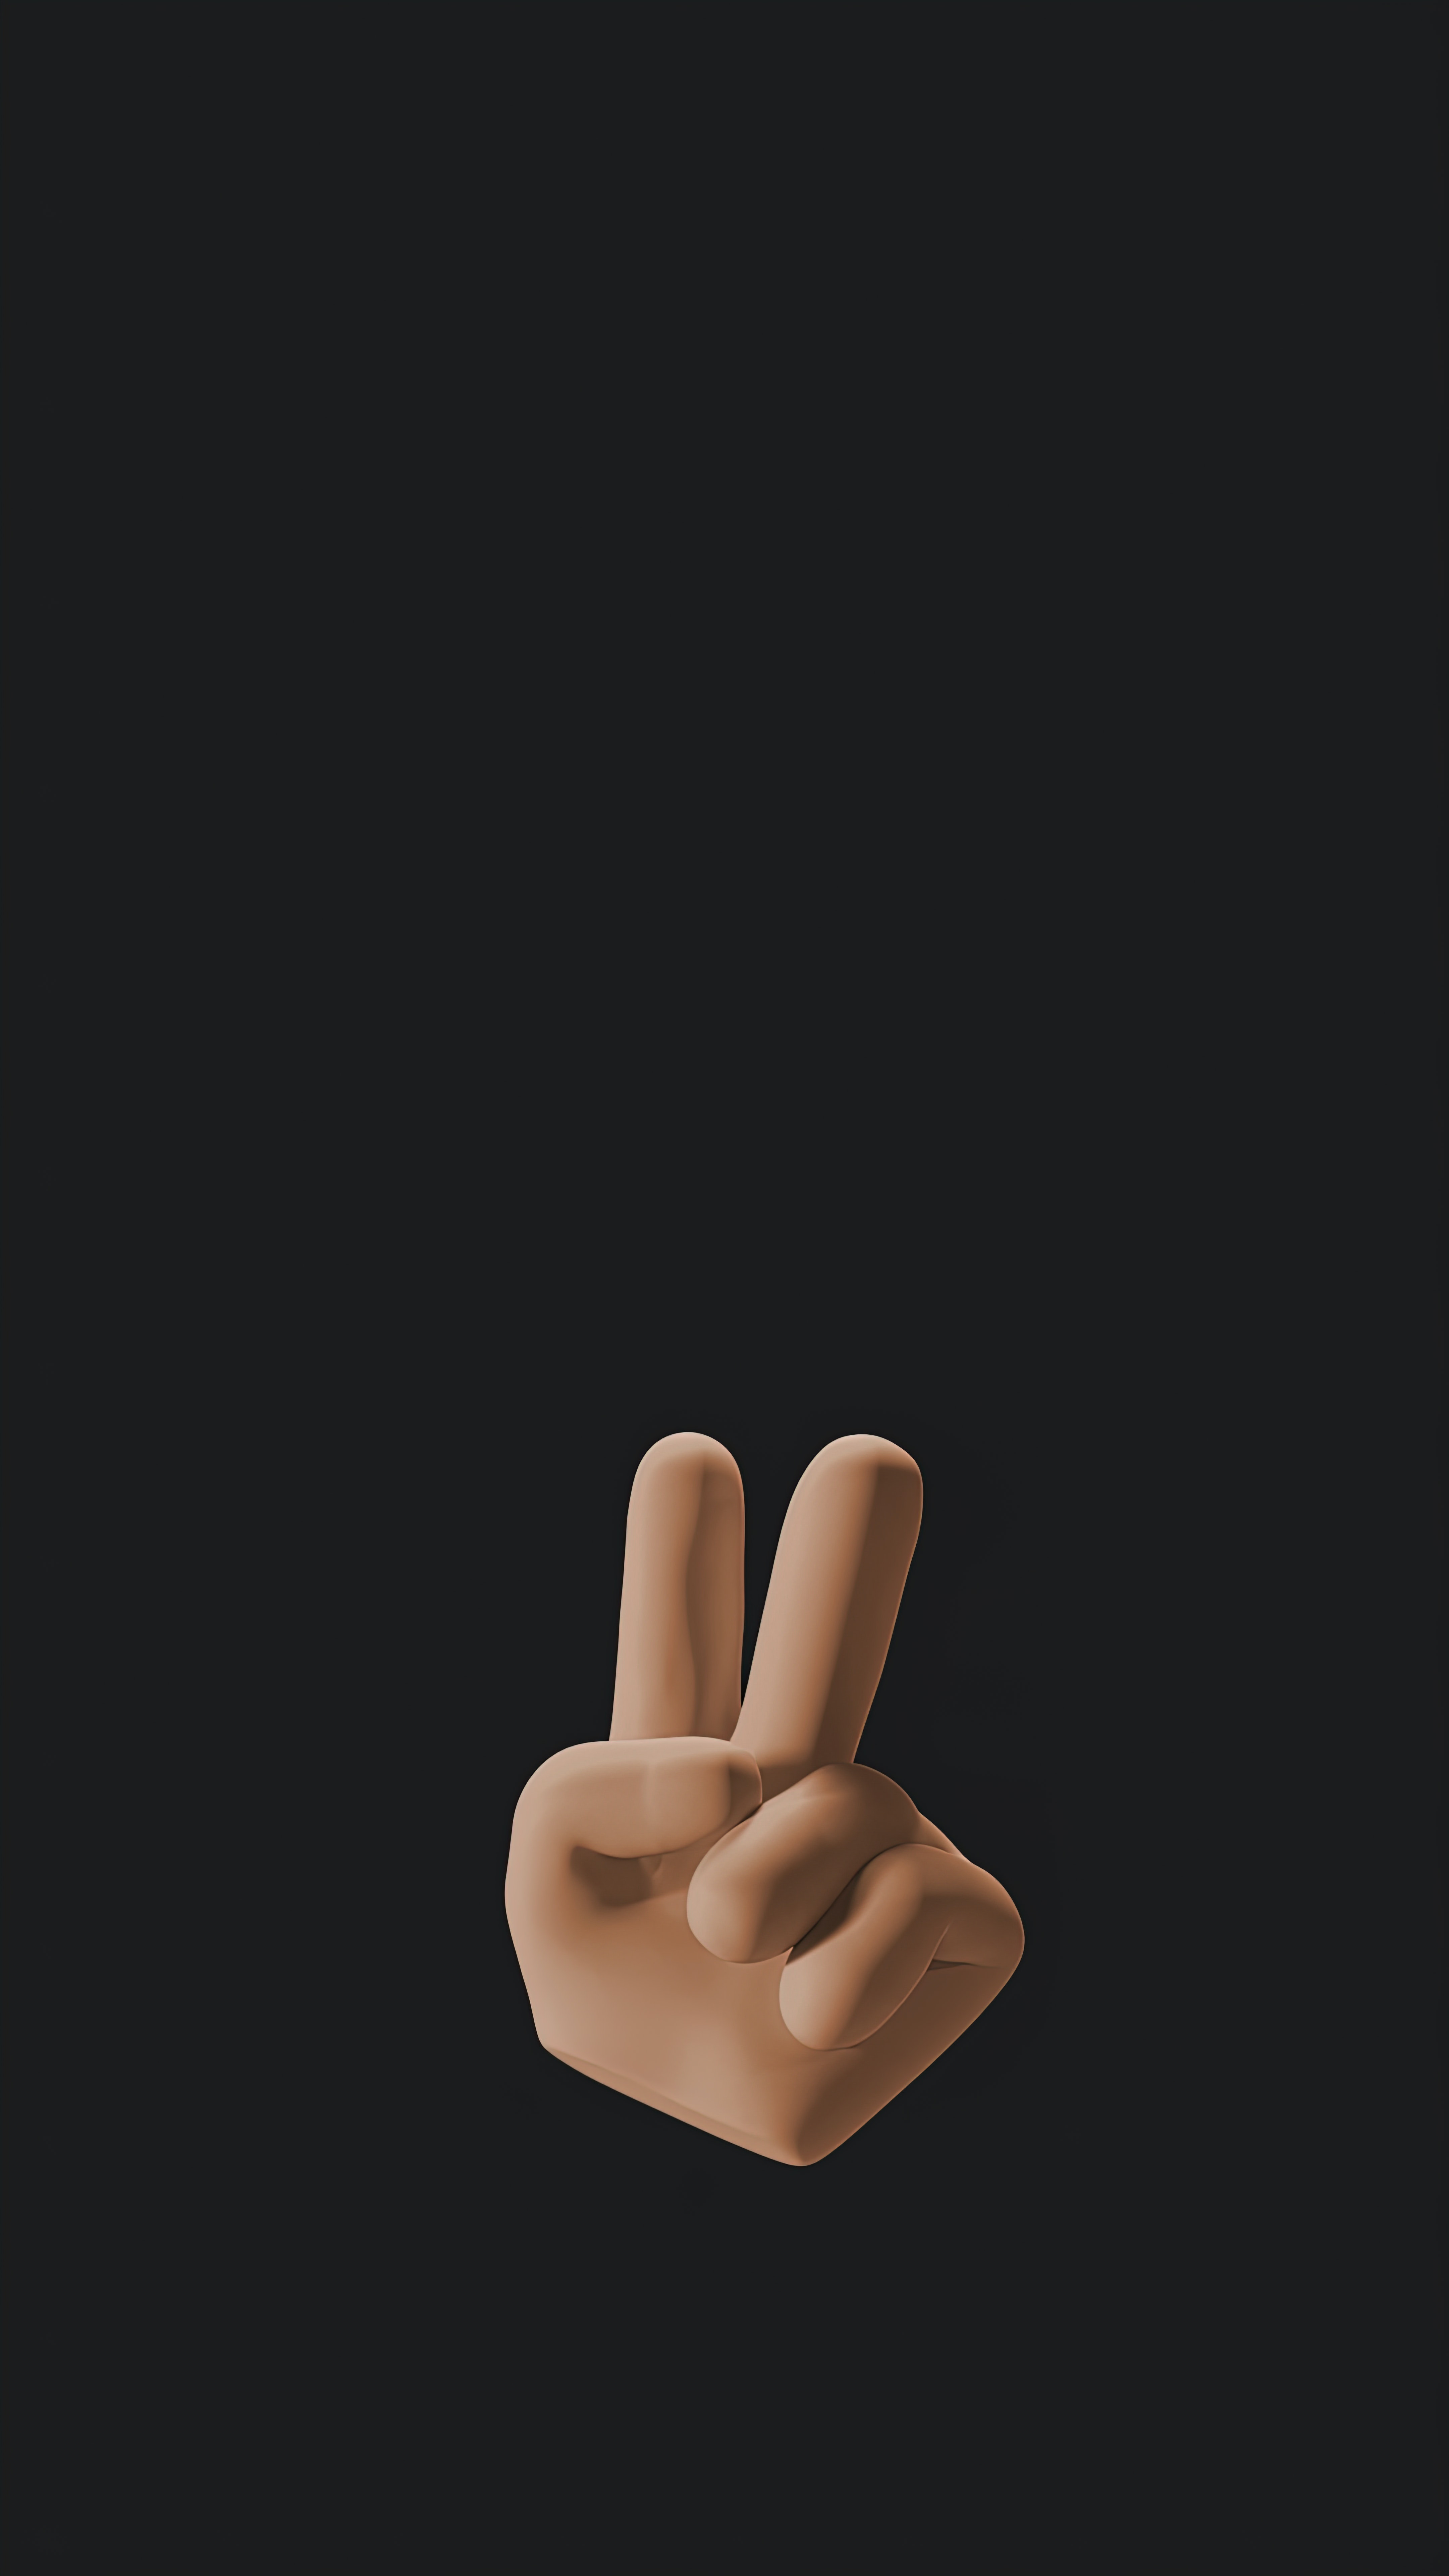 An Animation of a Hand Doing Peace Sign on a Black Background · Free